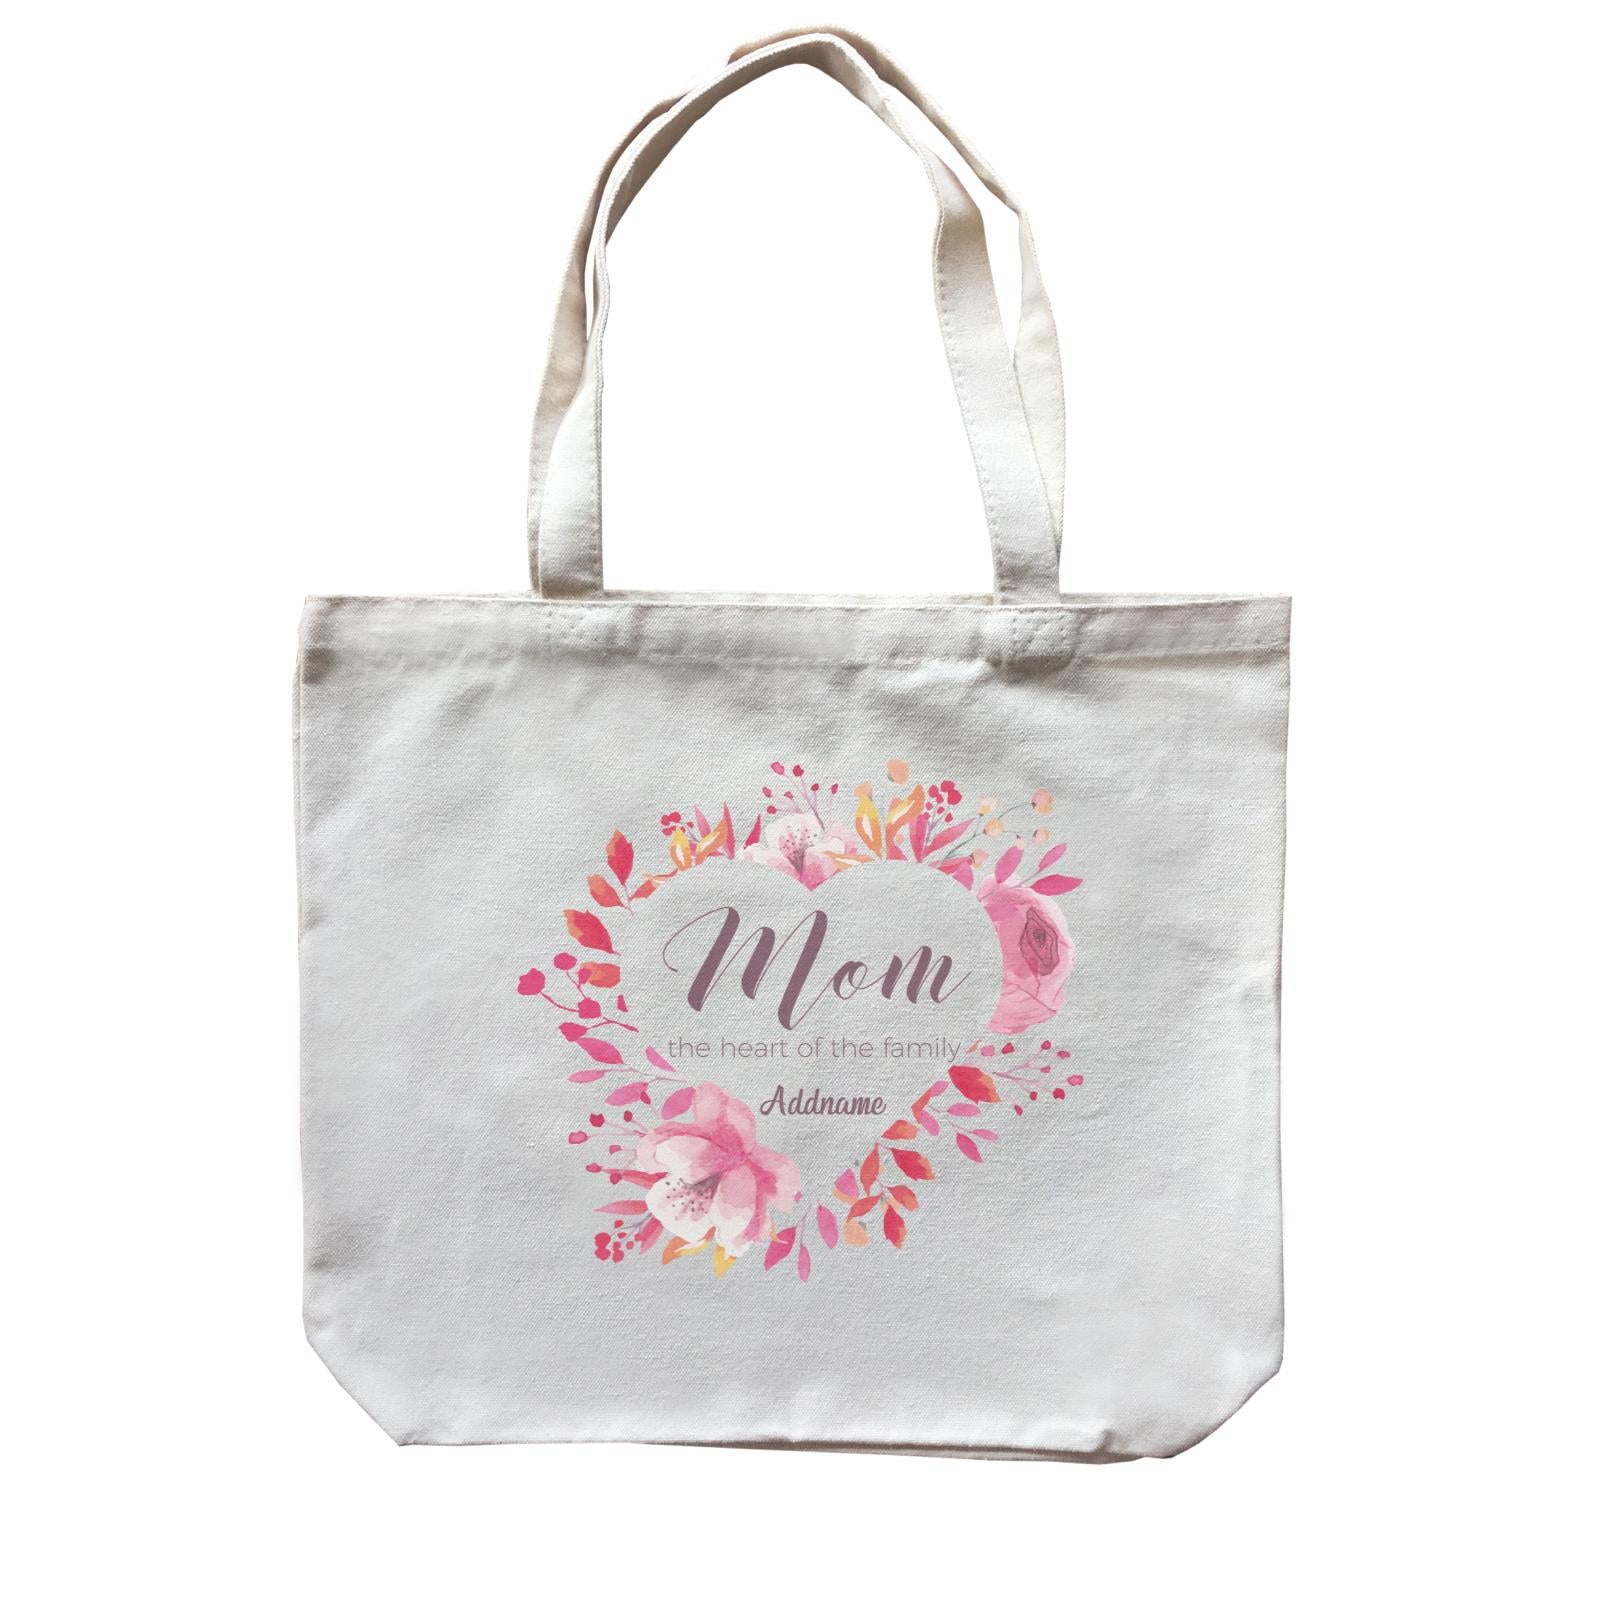 Sweet Mom Heart Mom The Heart of The Family Addname Canvas Bag